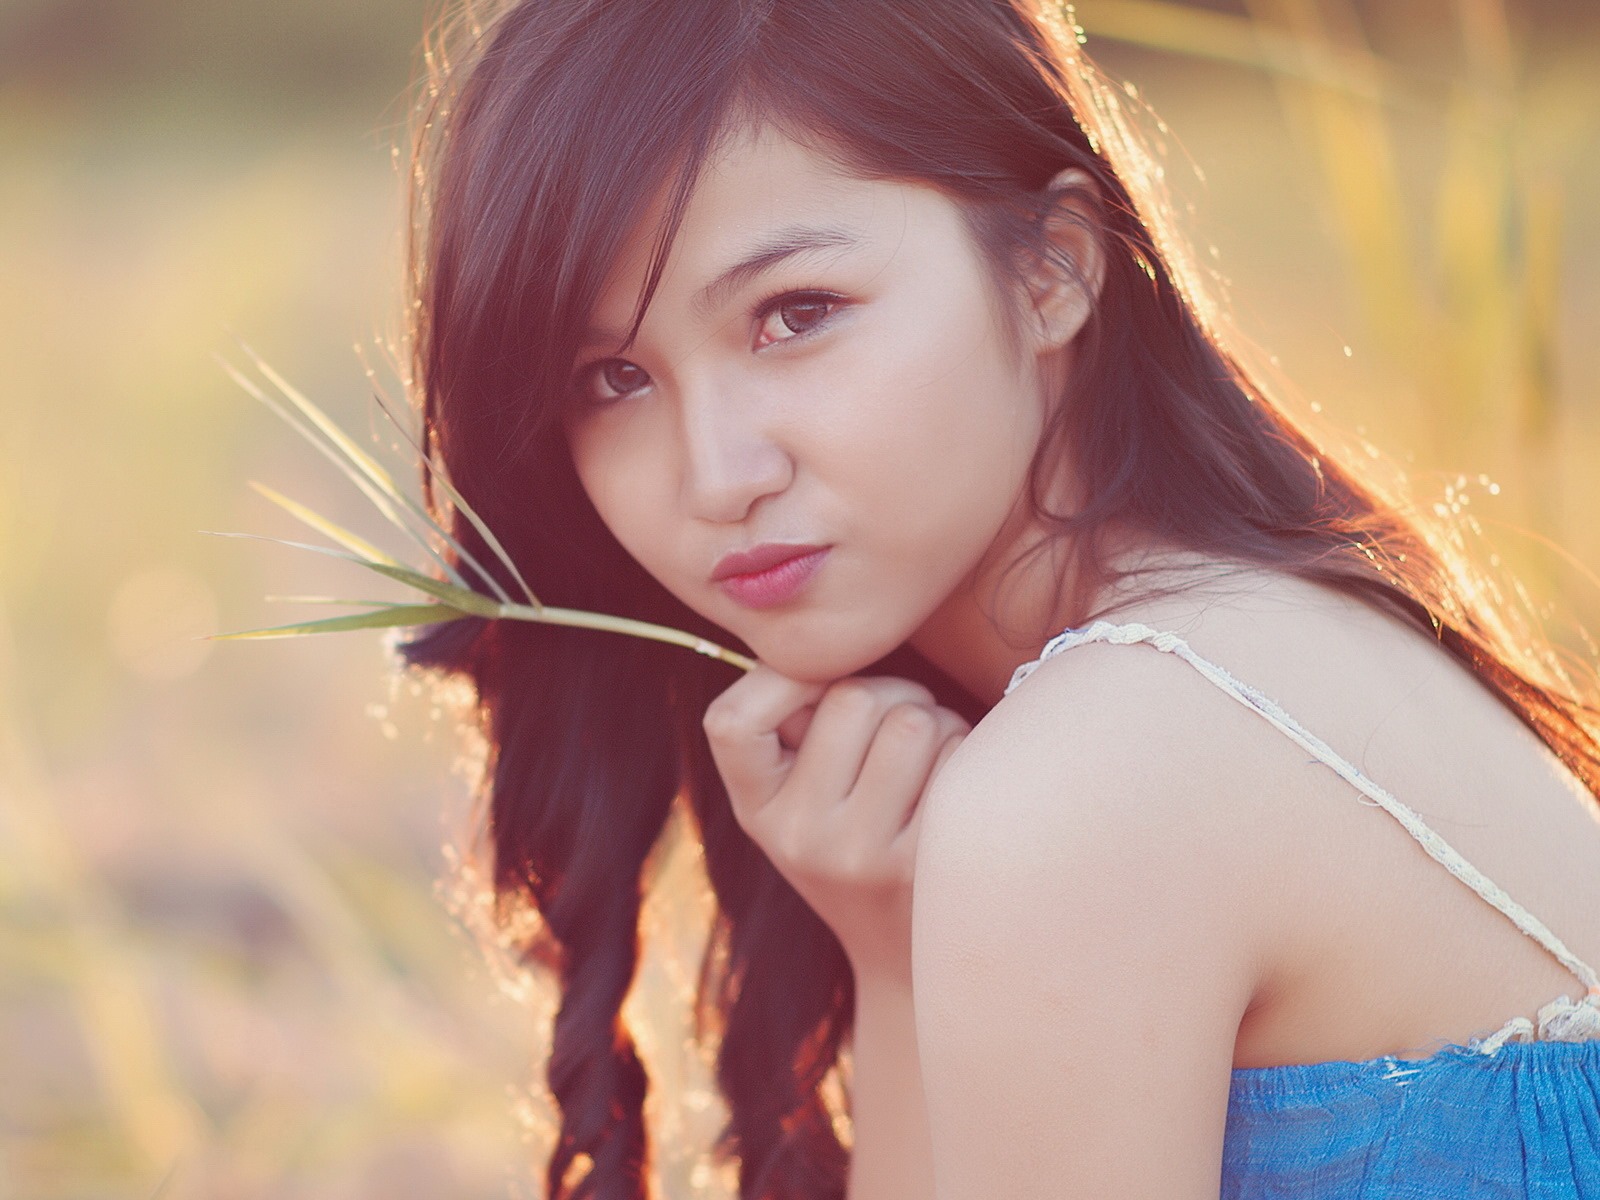 Pure and lovely young Asian girl HD wallpapers collection (5) #35 - 1600x1200